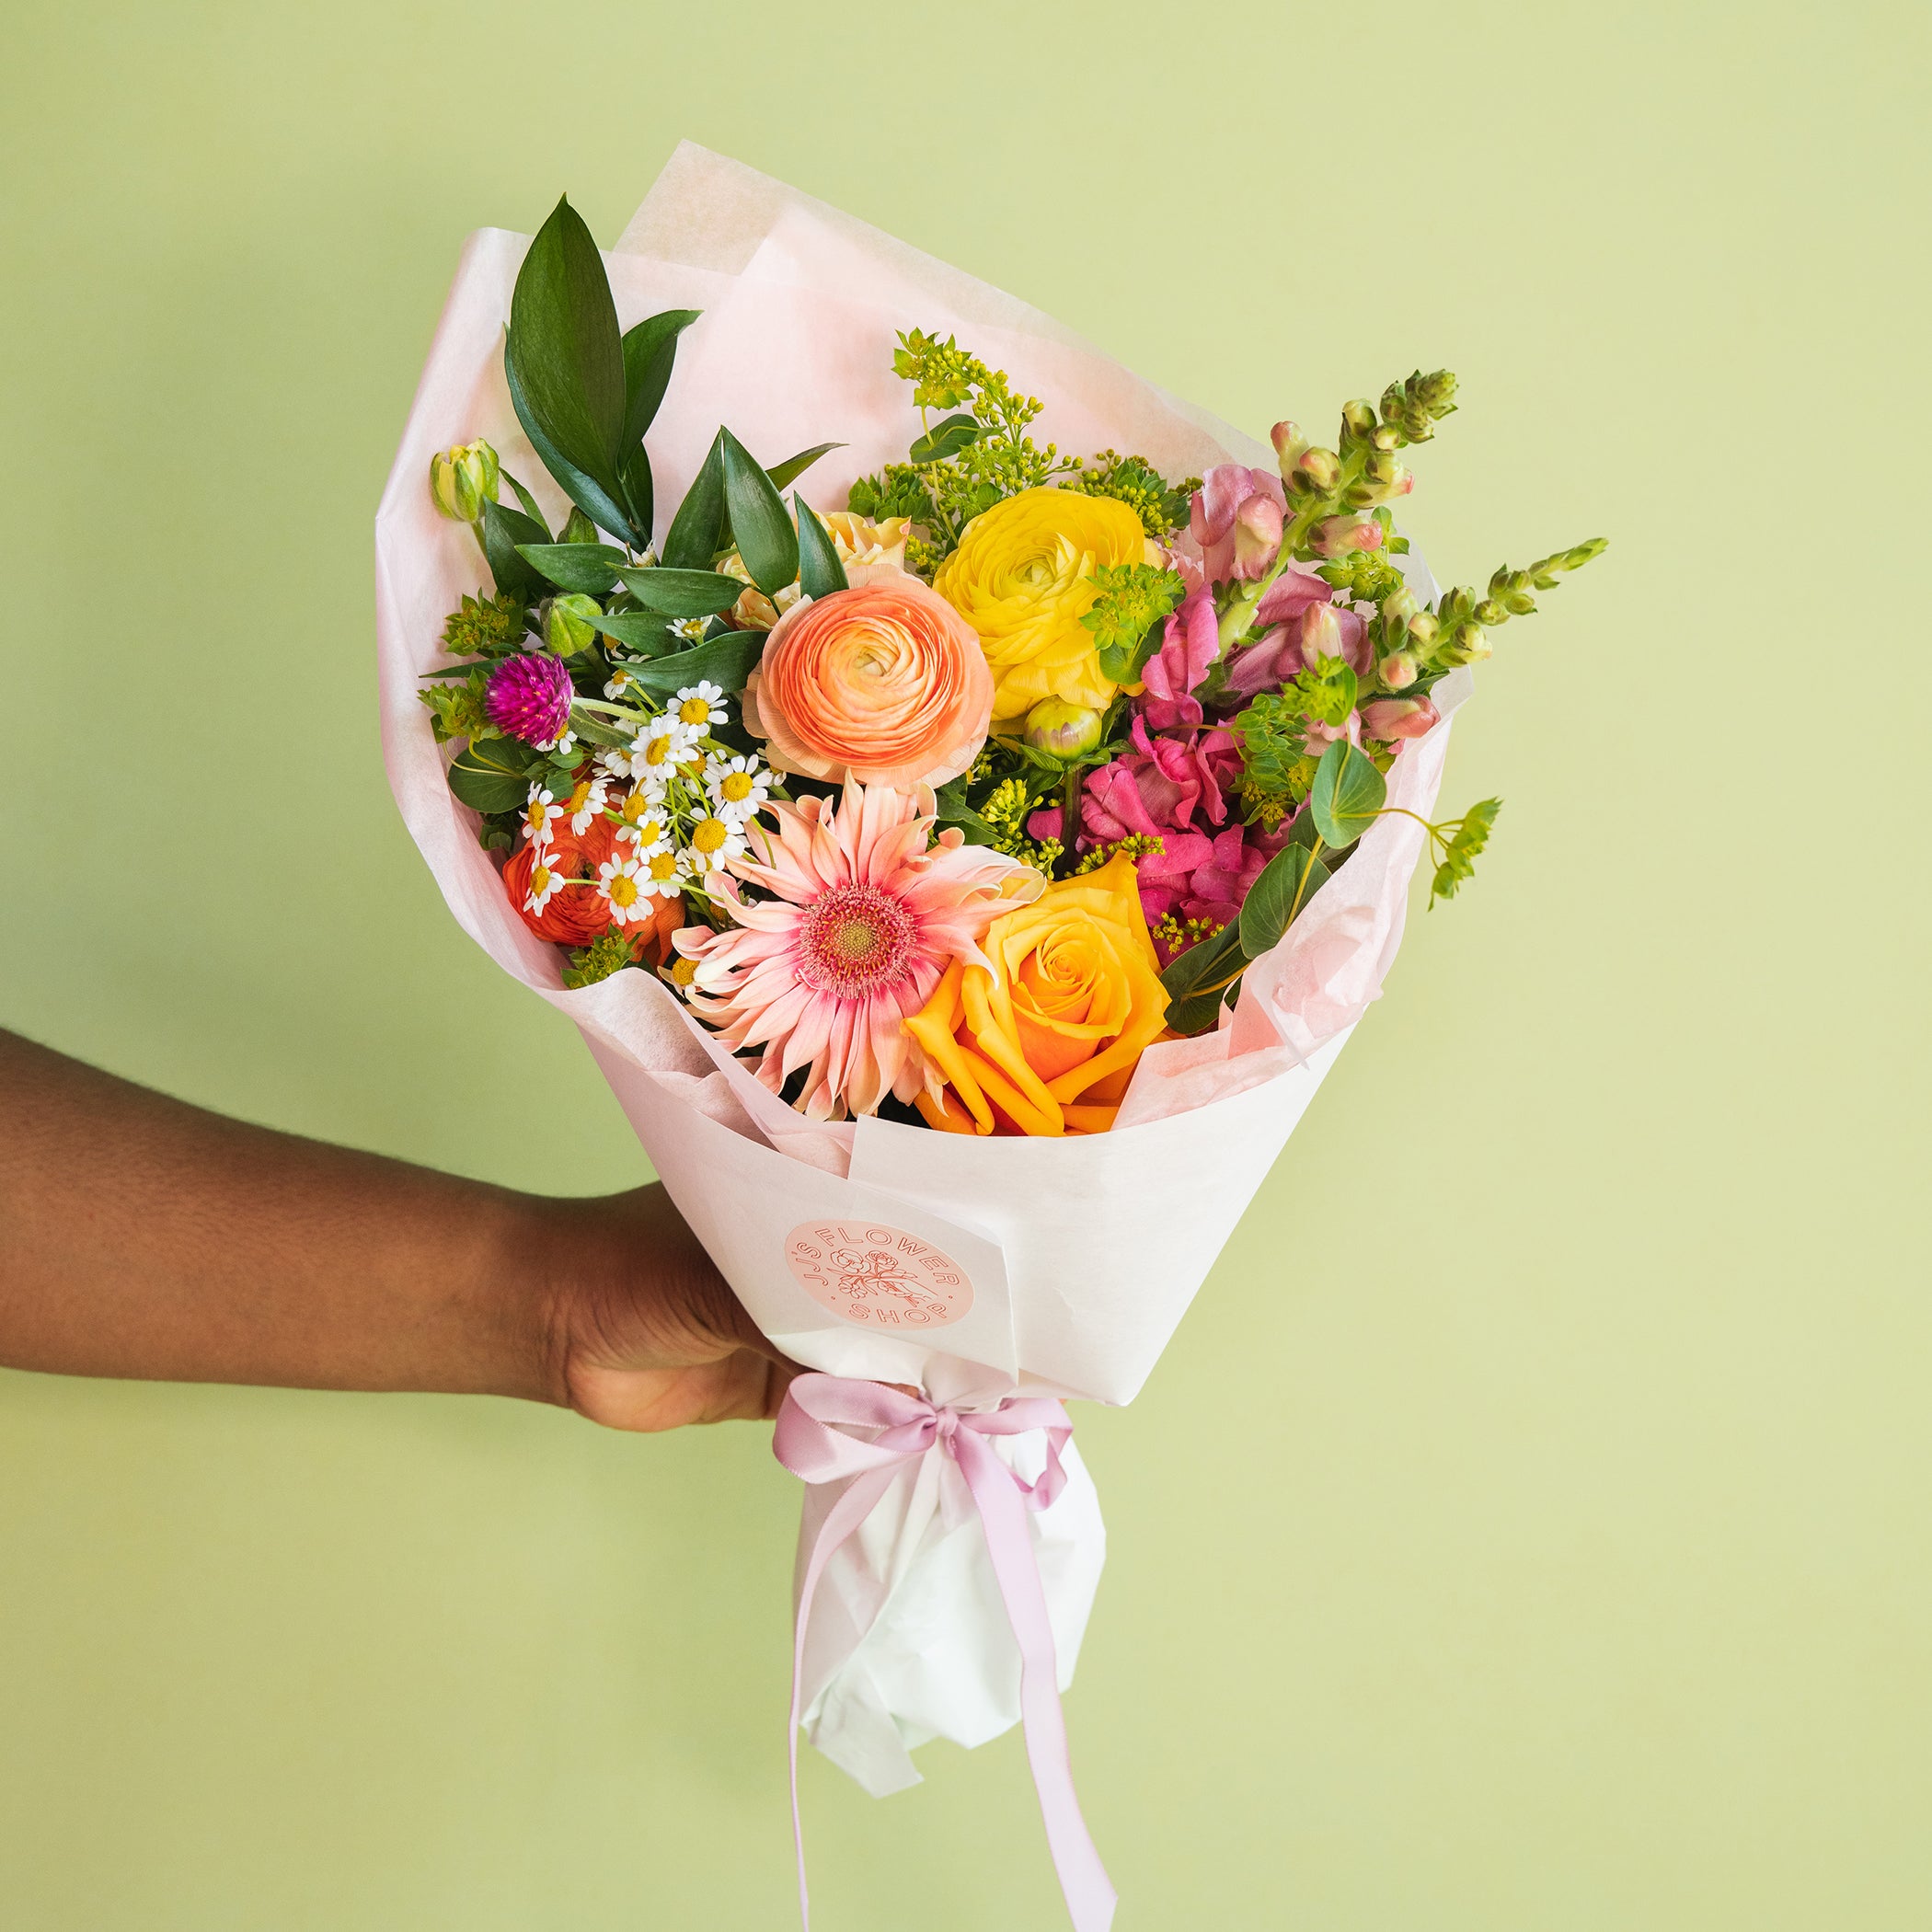 How Should A Flower Bouquet Be Wrapped?